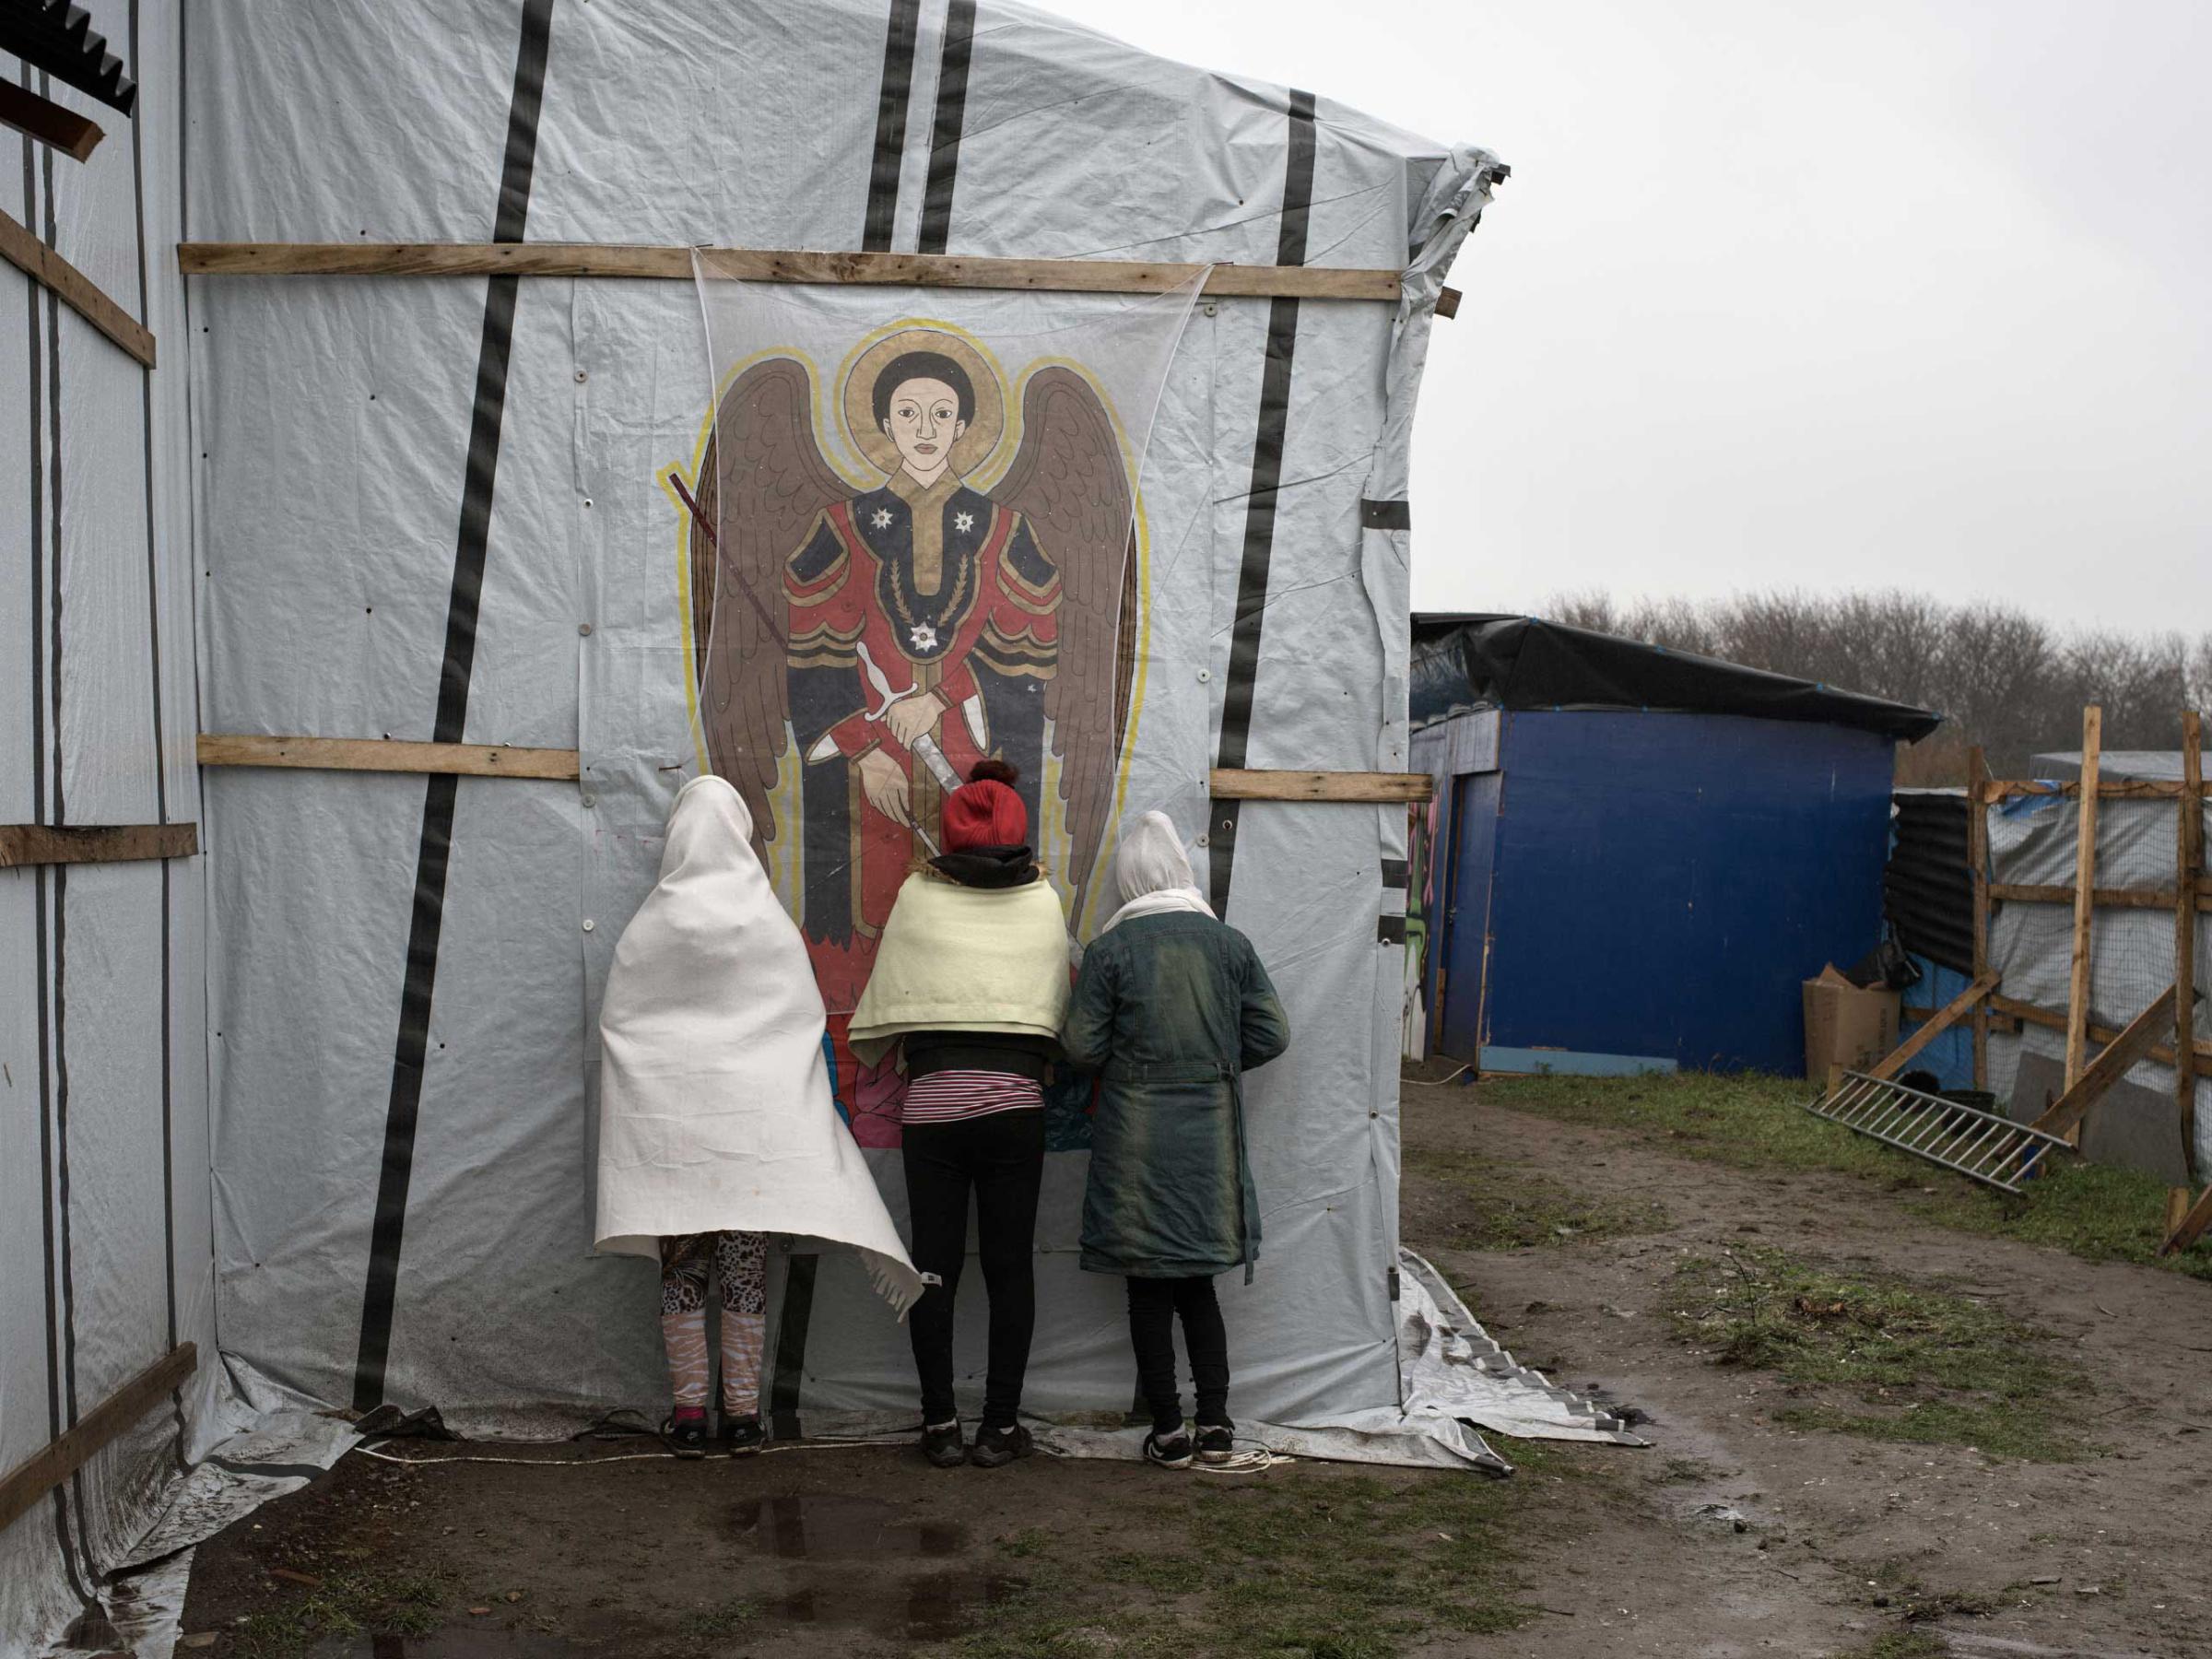 Orthodox Christians pray outside the makeshift church known as St. Michael's Calais  for the Ethiopian and Eritrean community in the "jungle" of Calais, France, Nov. 24, 2015.